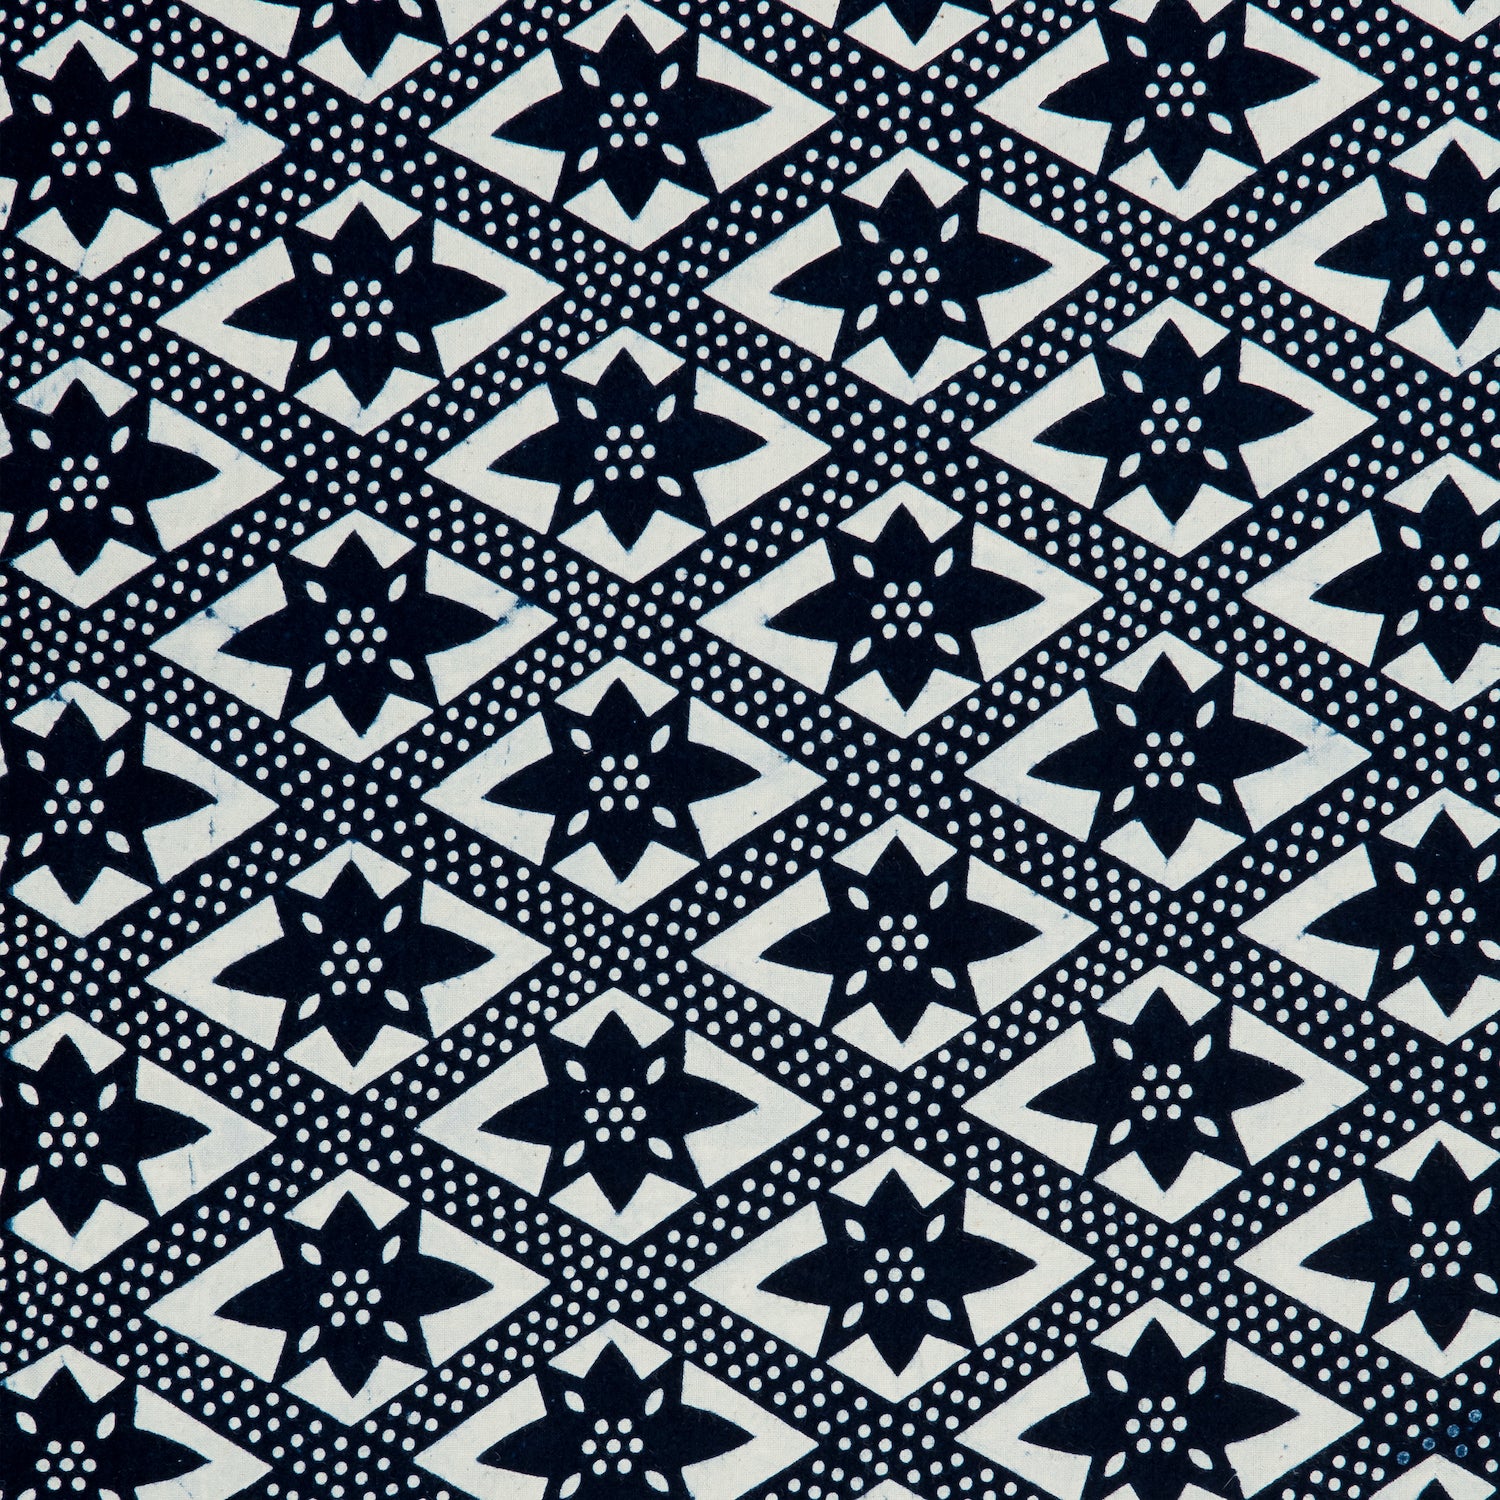 Detail of a cotton fabric in a gridded star pattern in indigo on a white field.